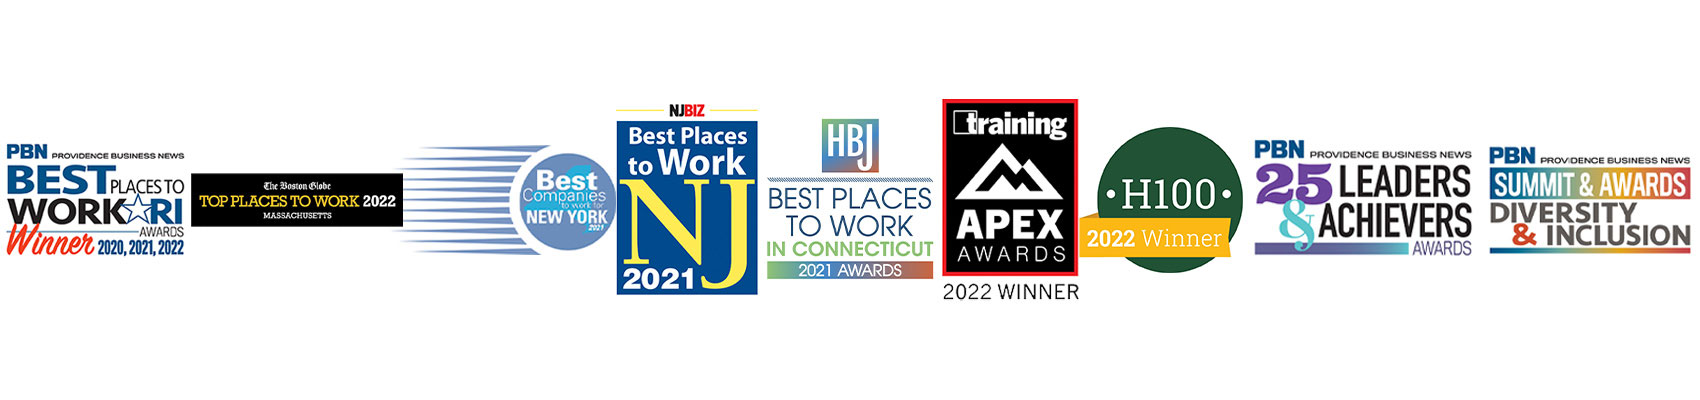 Providence Business News Best Places to Work RI Awards - Winner (2020, 2021, 2022); Boston Globe Top Places to Work 2022; Best Companies New York 2021; NJBiz Best Places to Work 2021; HBJ Best Places to Work in Connecticut 2021; APEX Awards 2022 Winner; H100 2022 Winner; PBN 25 Leaders and Achievers Awards; PBN Diversity and Inclusion Awards